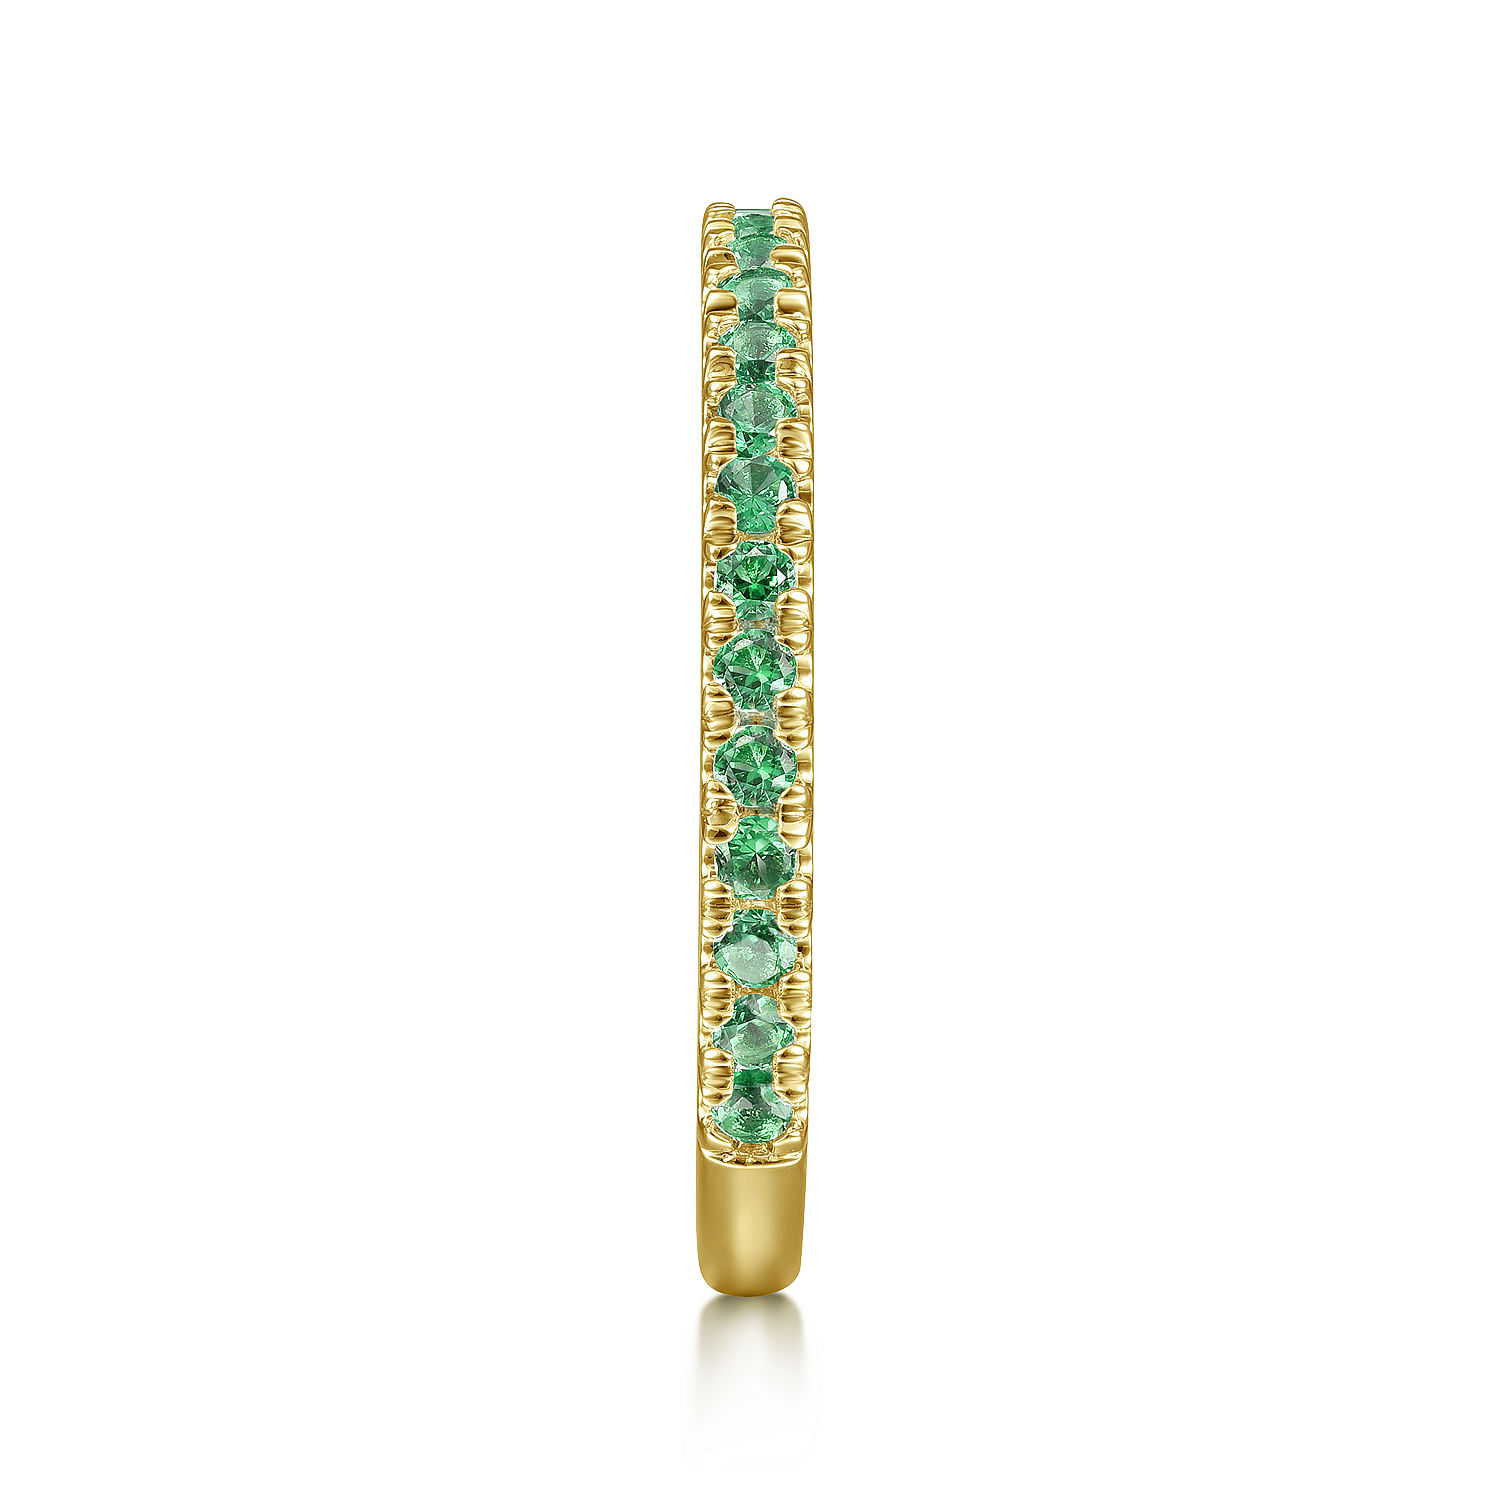 14K Yellow Gold Emerald Stacklable Ring